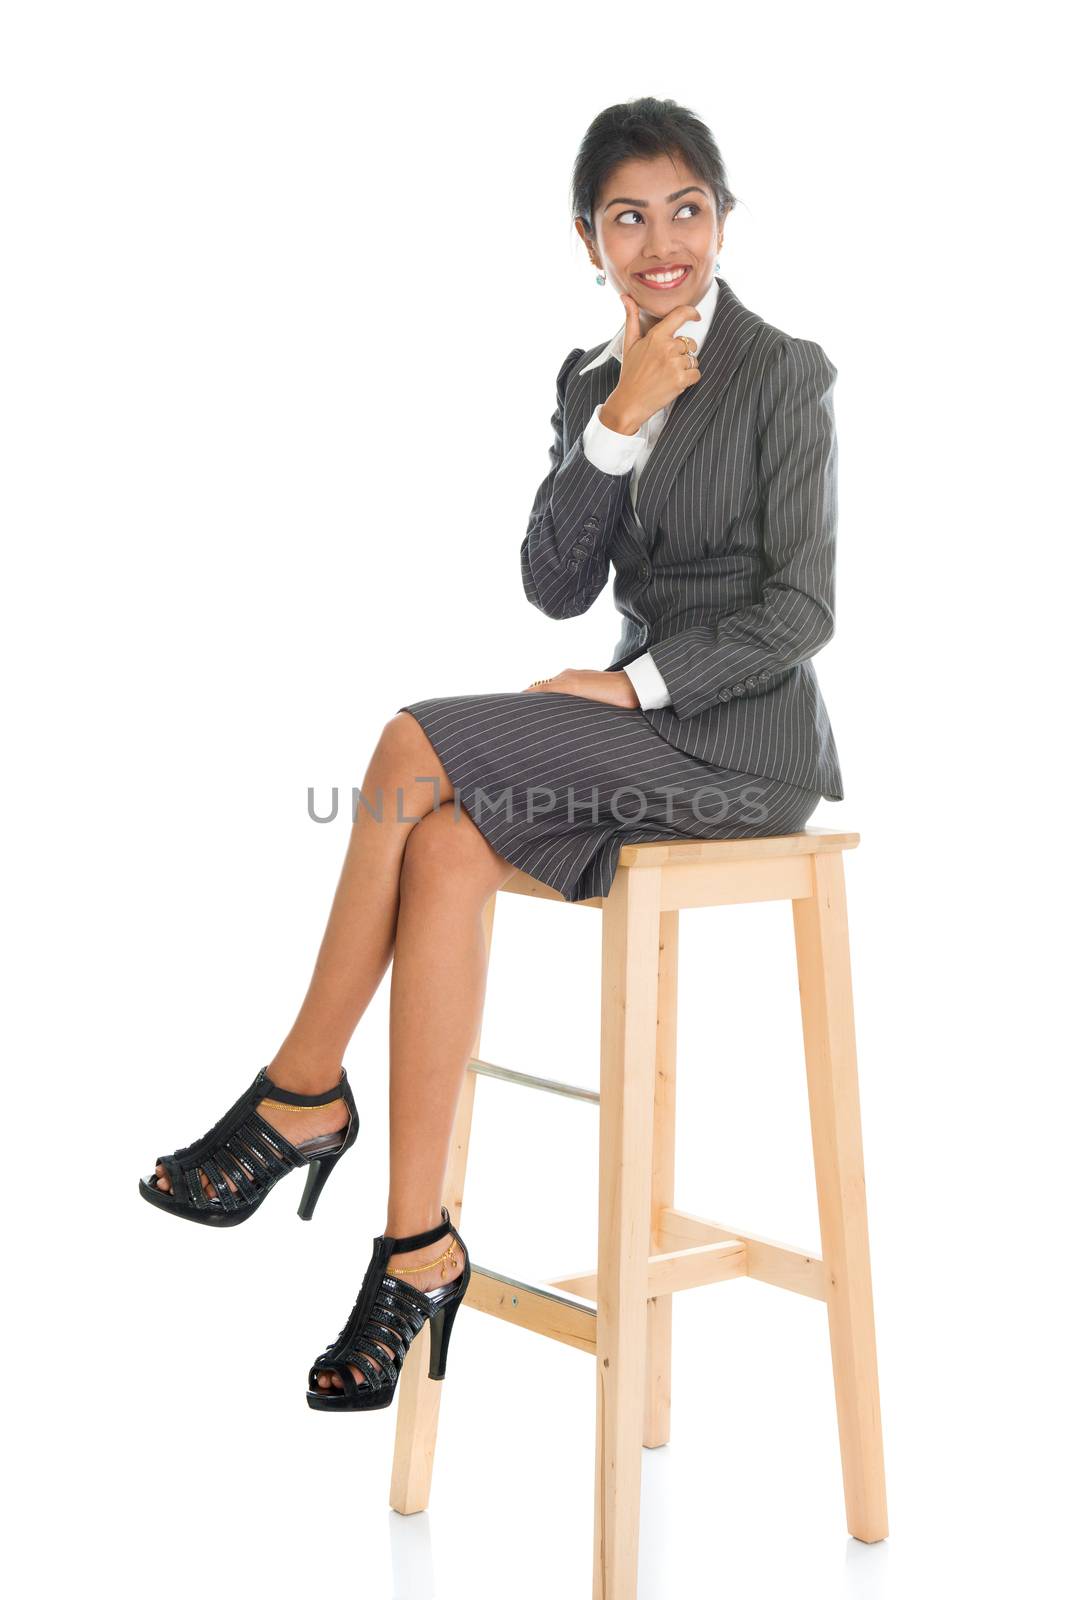 Full length black businesswoman sitting on high chair and having a thought, isolated on white background.